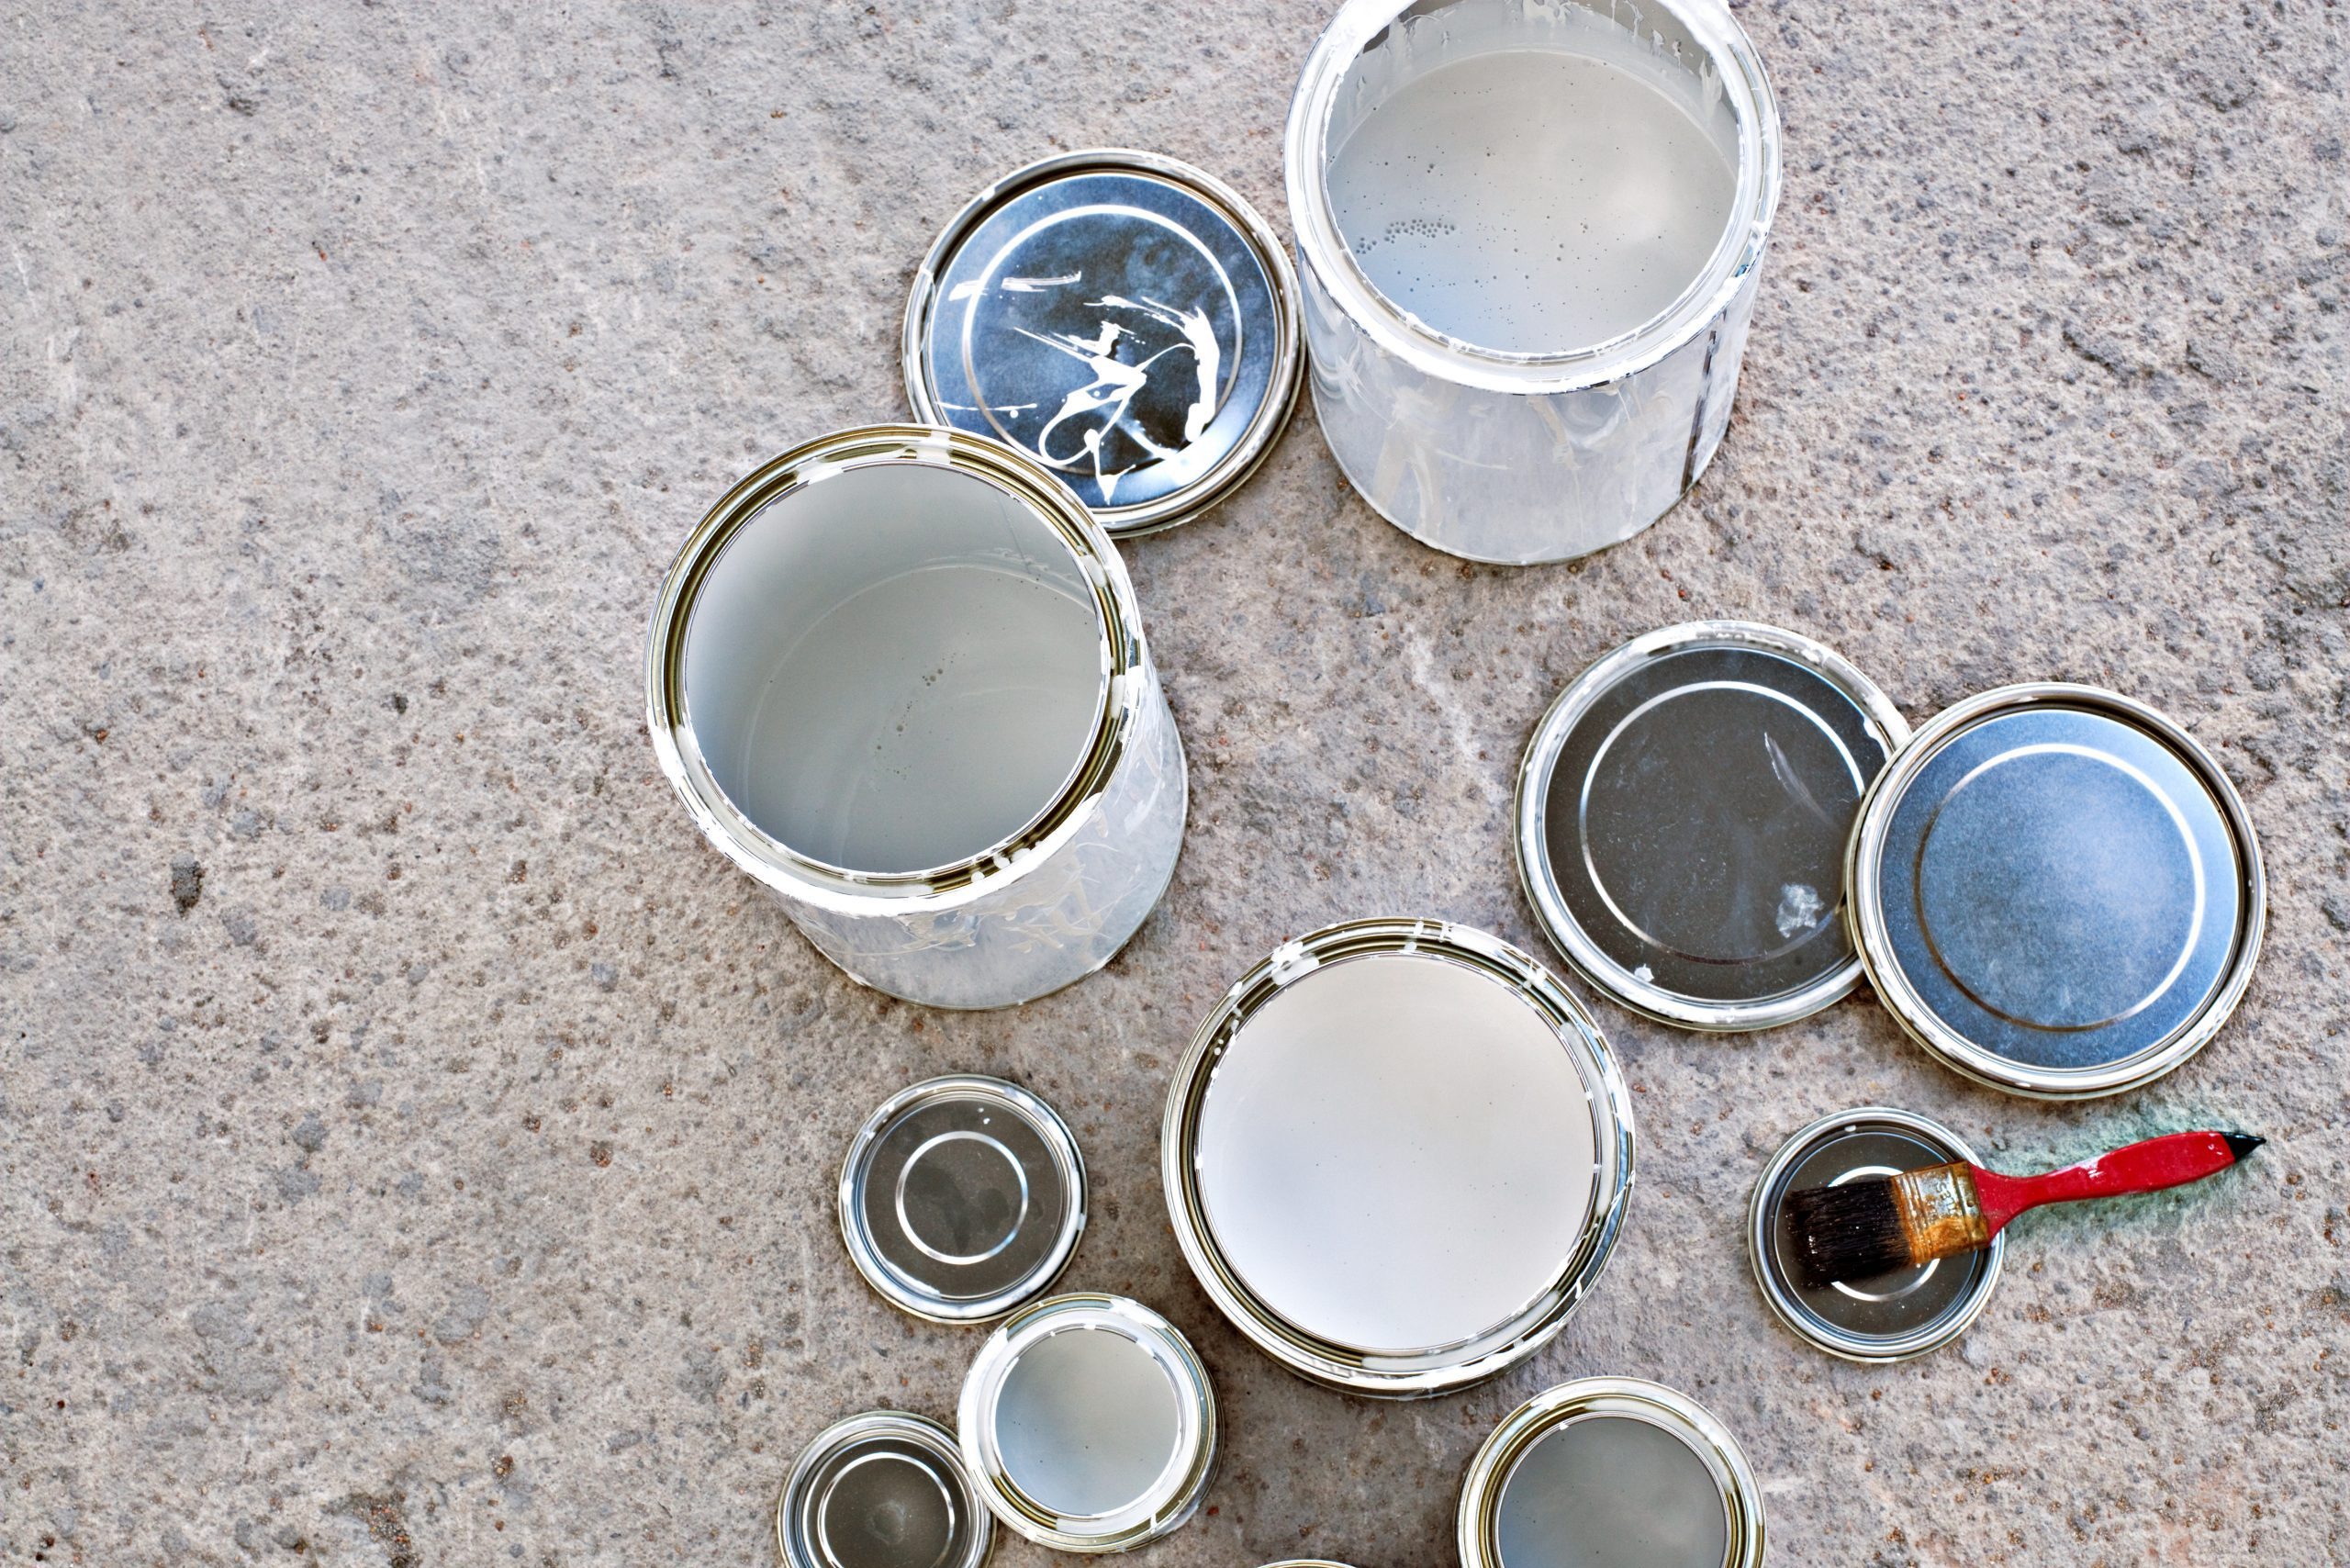 Empty Paint Cans Gettyimages 95011888